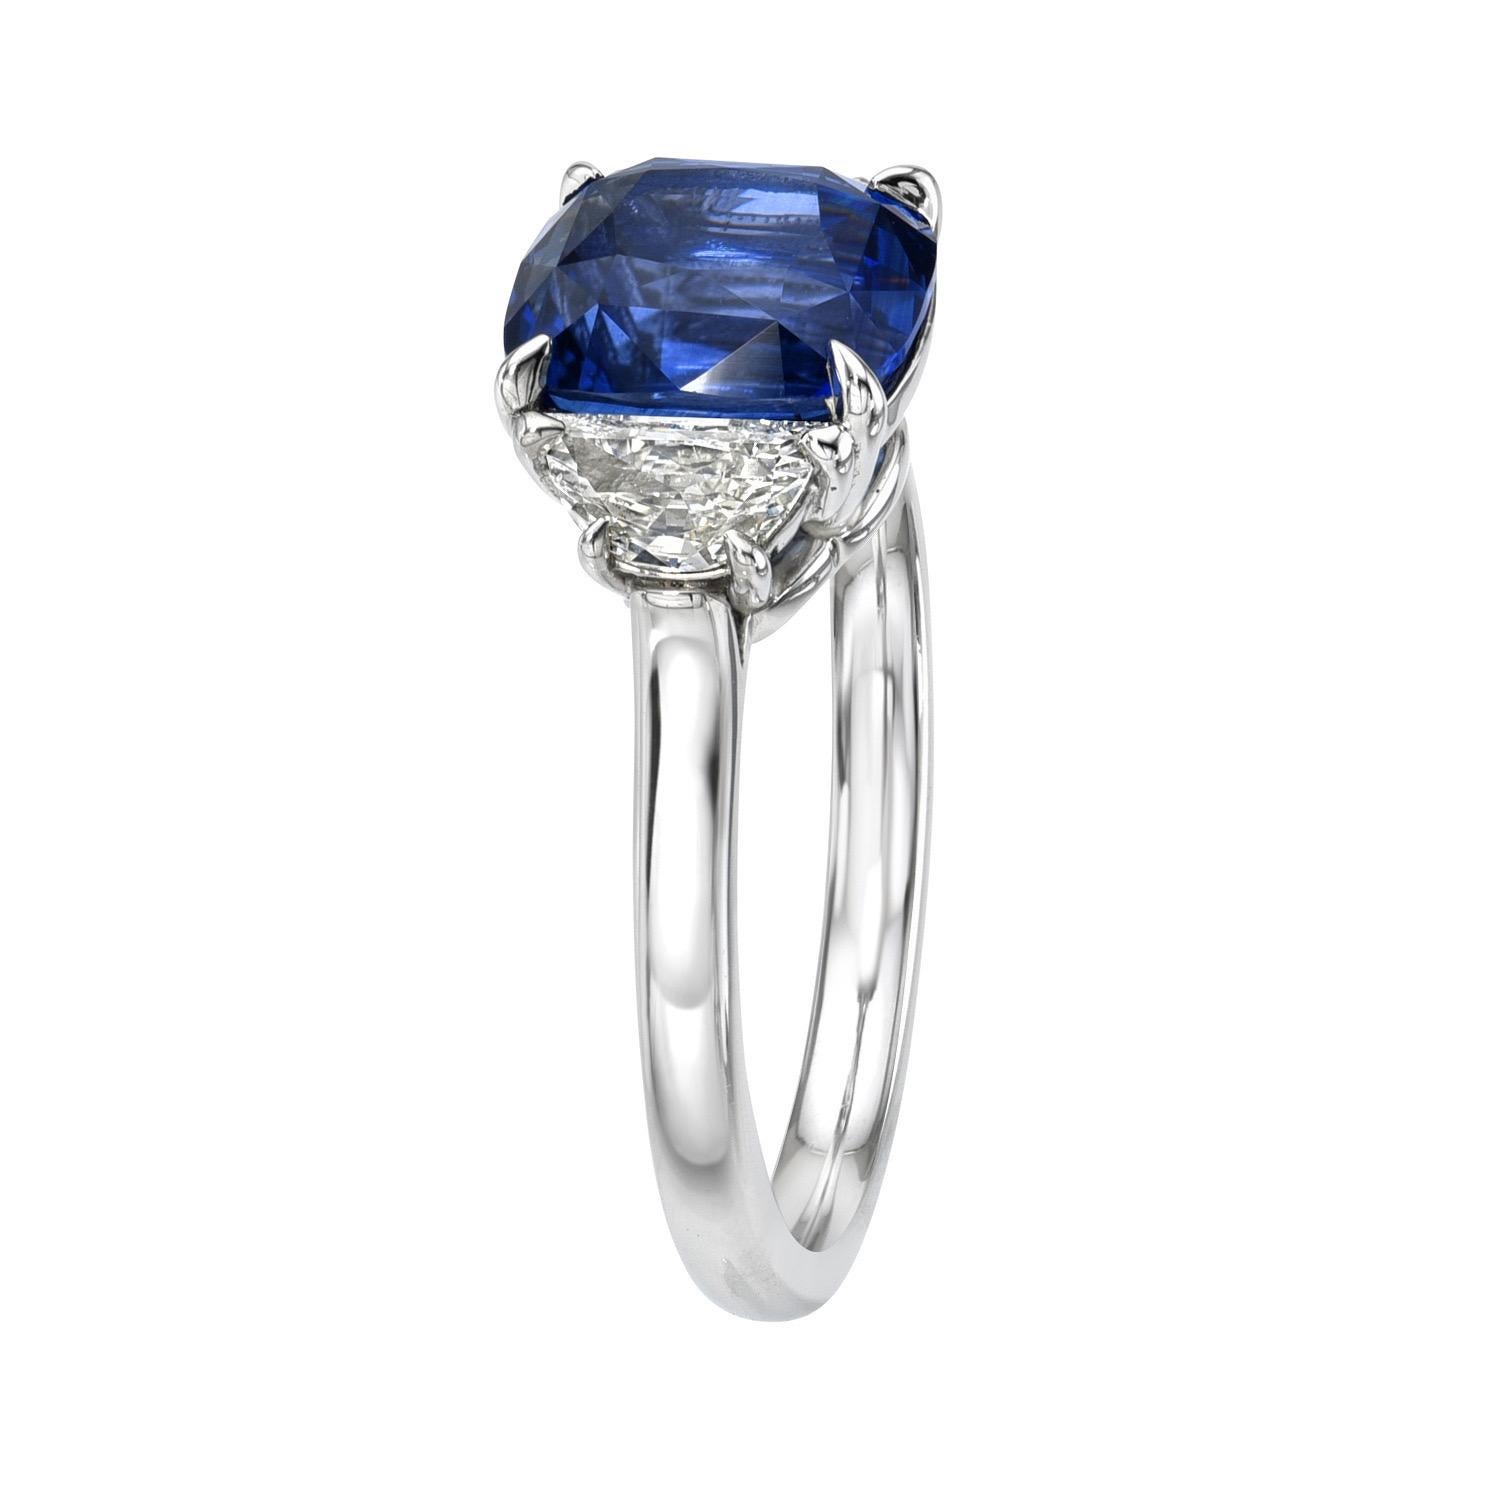 Timeless 3.06 carat Ceylon Blue Sapphire cushion, three stone platinum ring, flanked by a pair of 0.36 carat, E/VS half moon diamonds.
Ring size 6. Resizing is complementary upon request.
The GIA gem report is attached to the image selection for